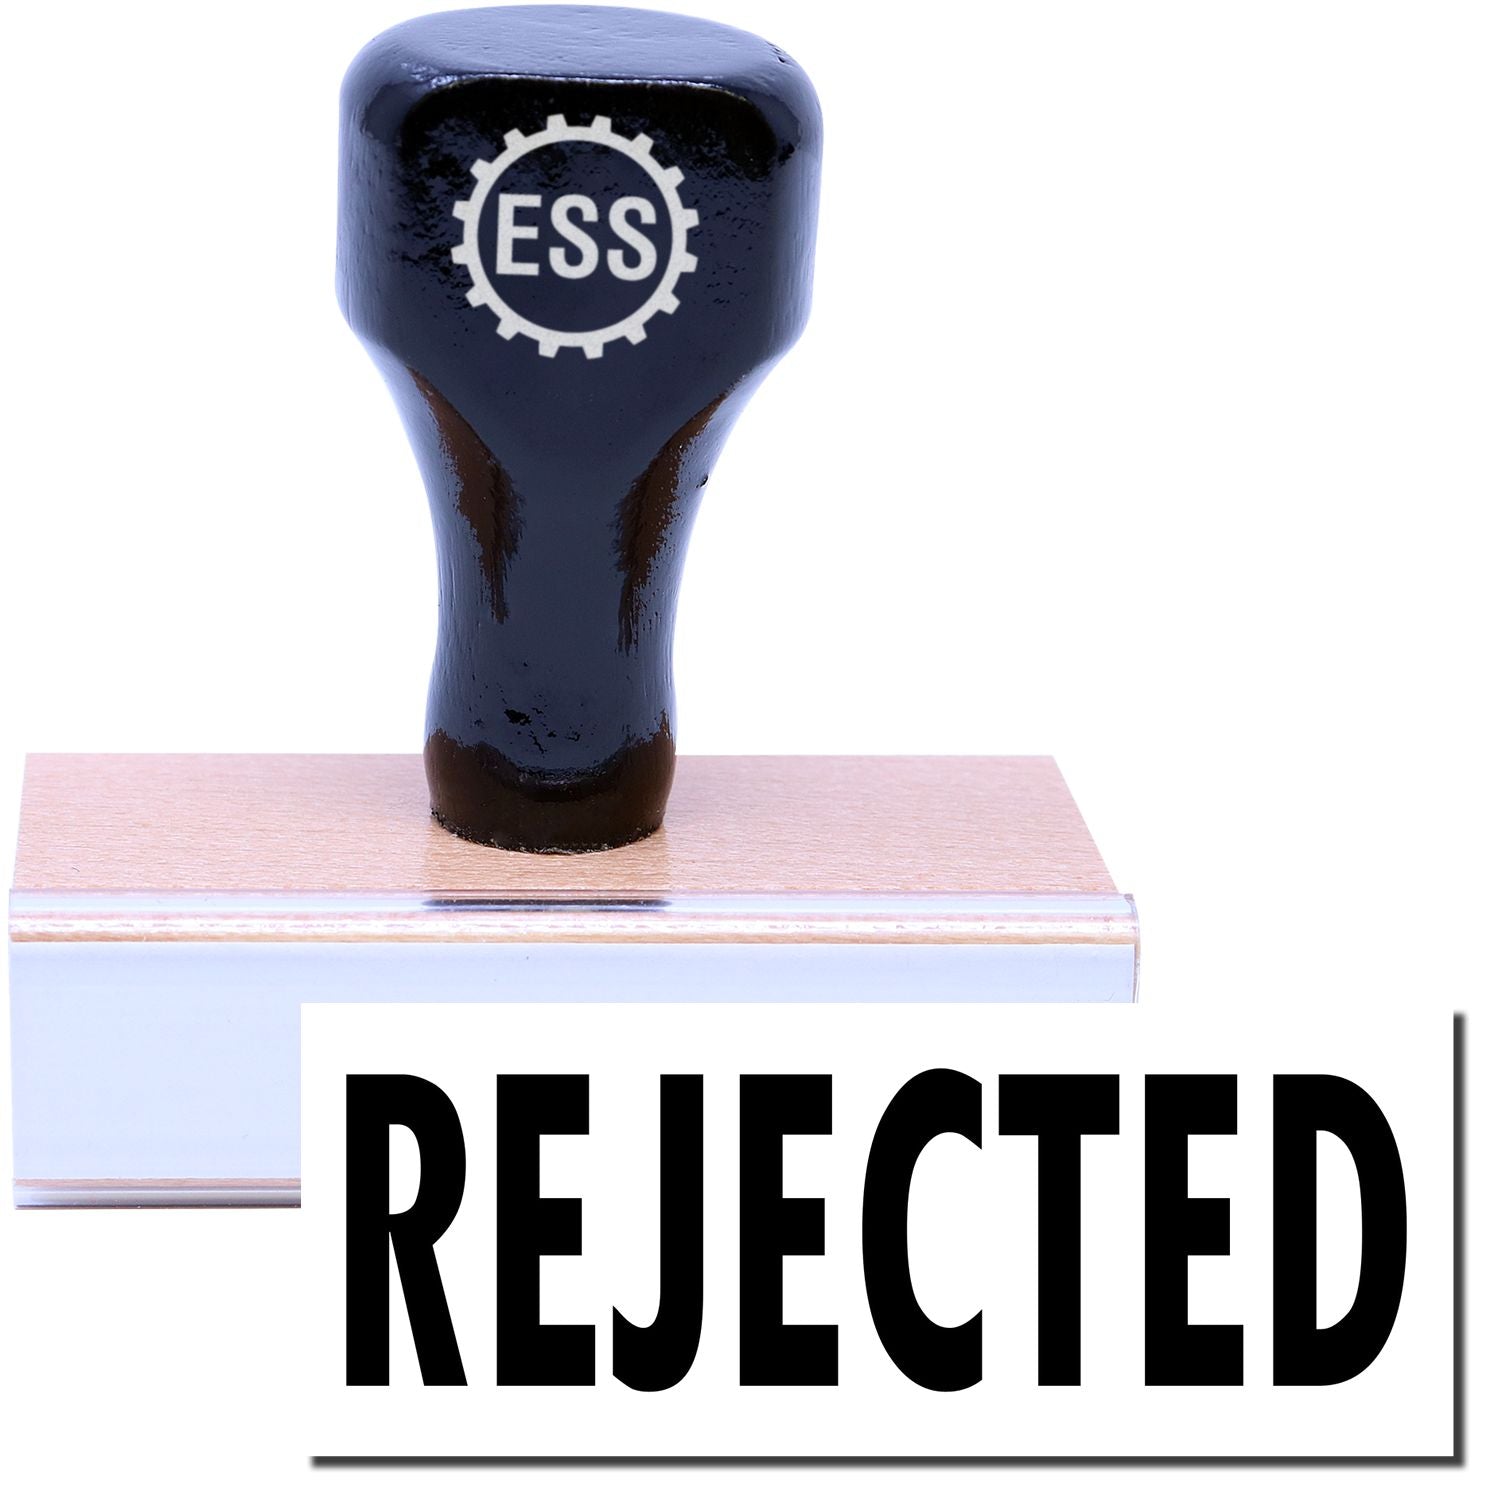 A stock office rubber stamp with a stamped image showing how the text "REJECTED" is displayed after stamping.